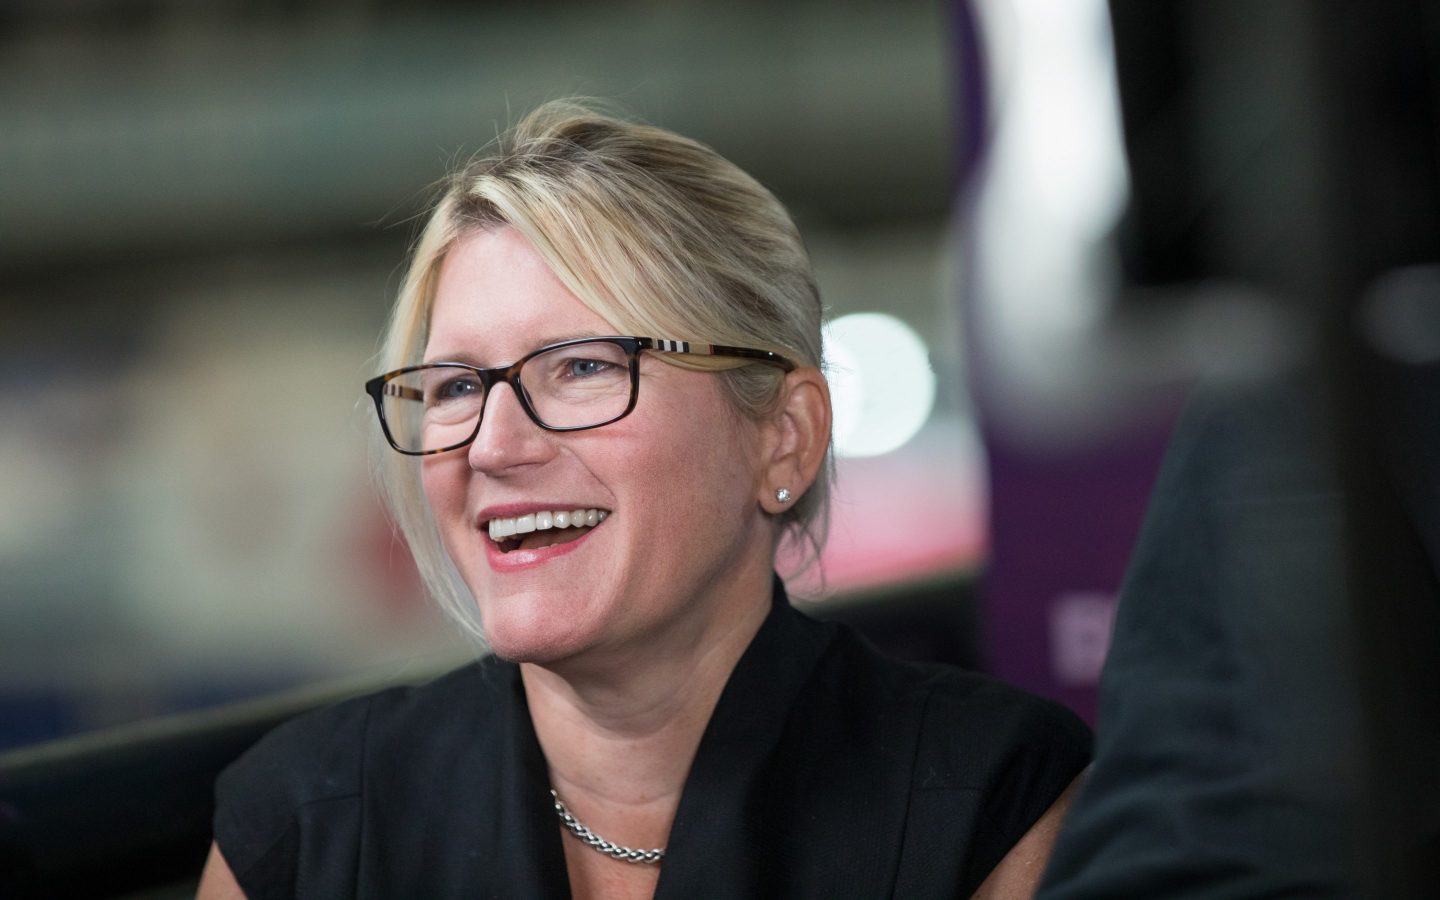 In January, JetBlue's Joanna Geraghty became the first woman CEO of a major U.S. airline.